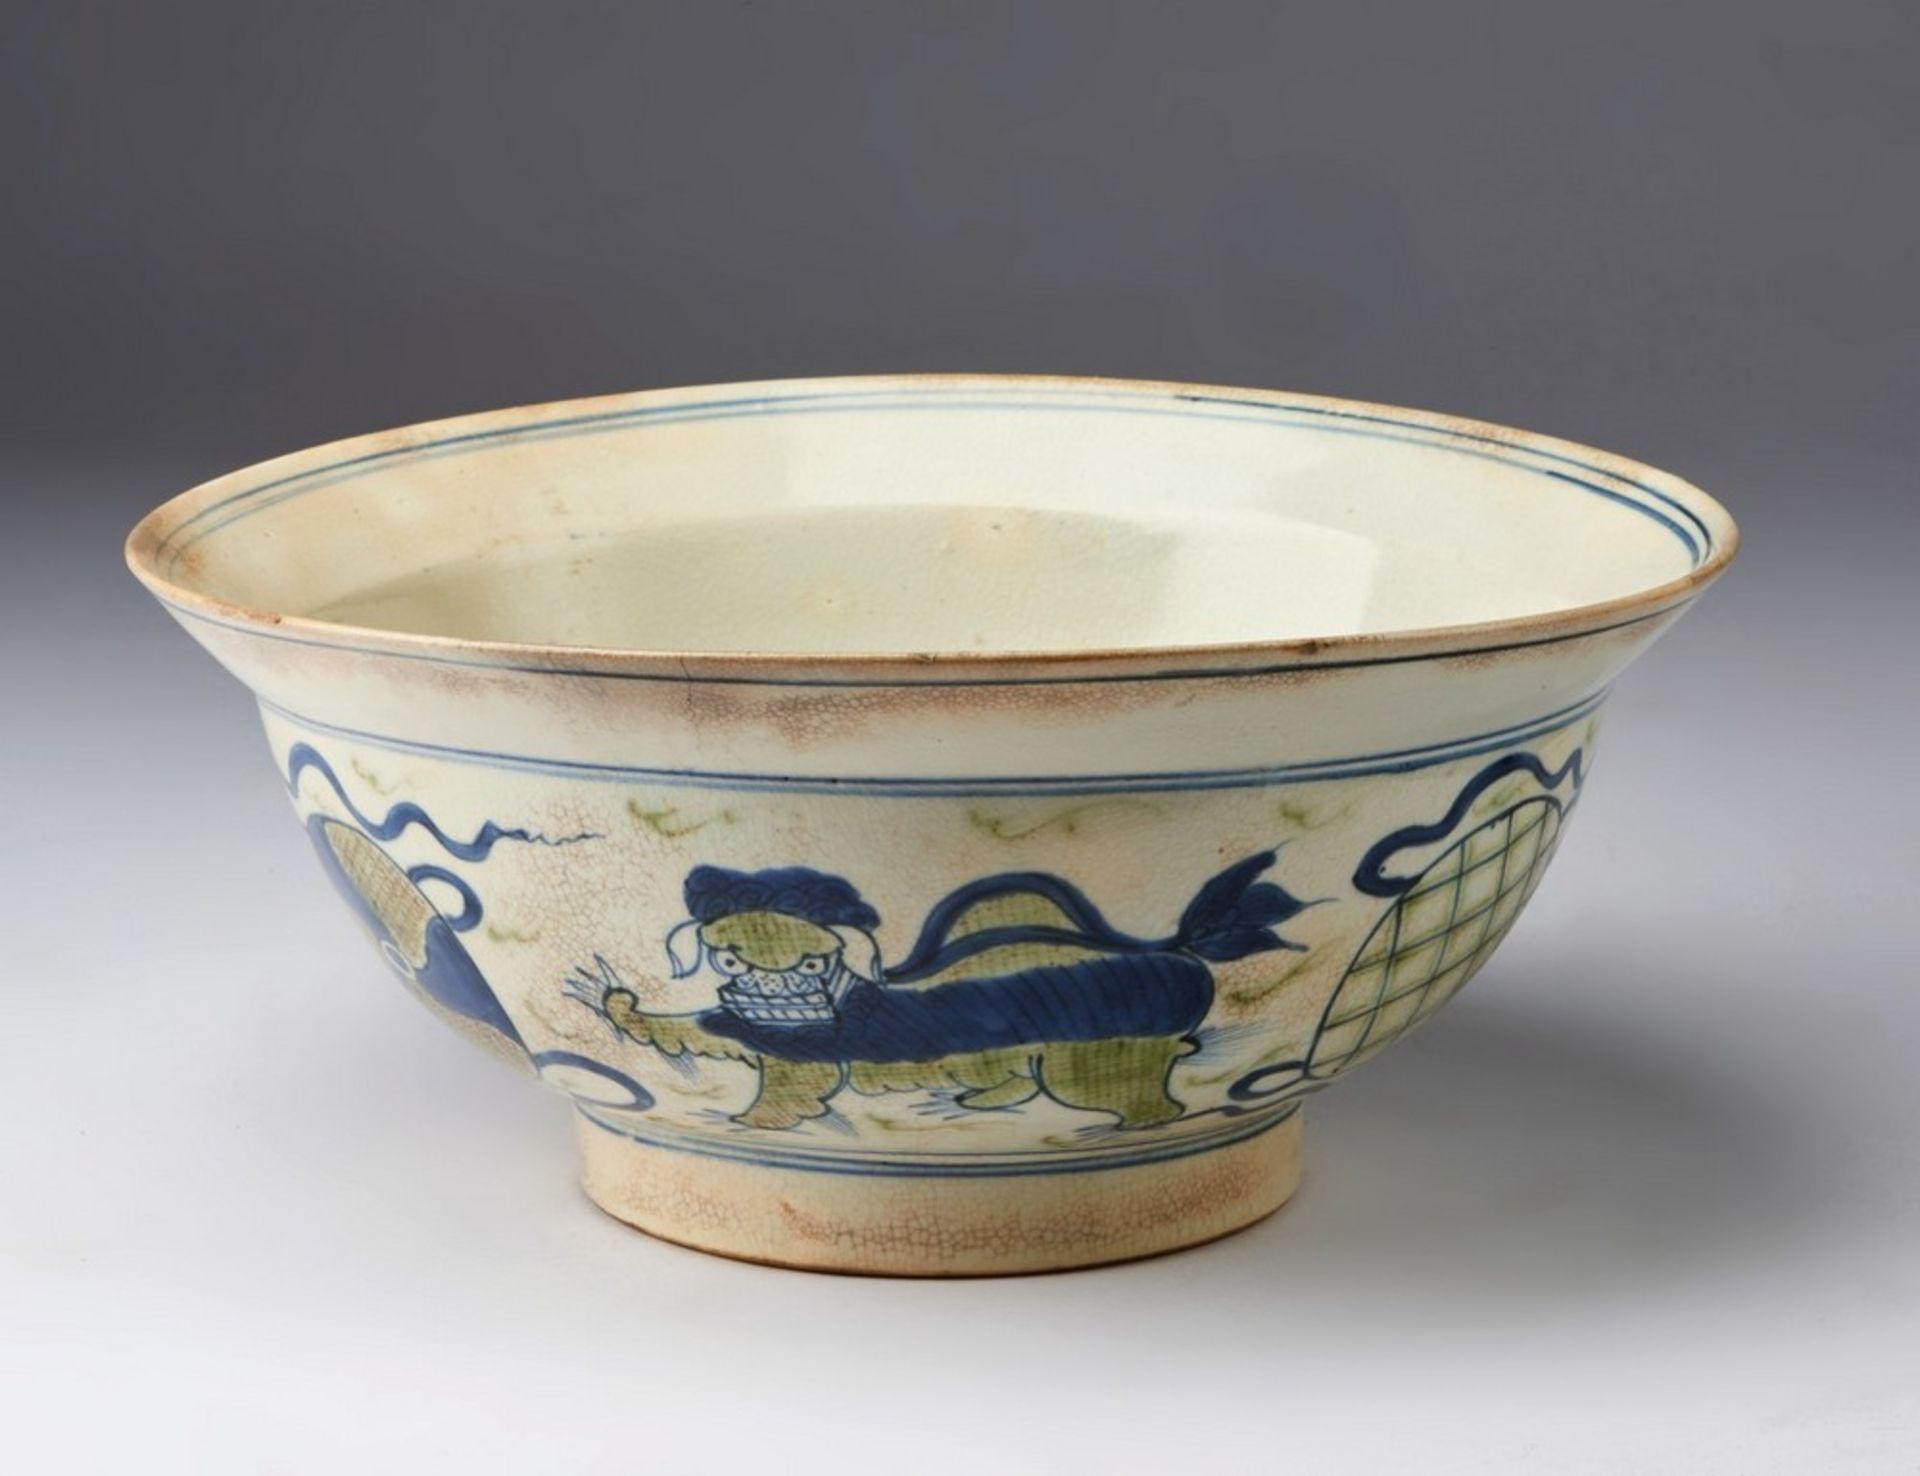 Arte Islamica A Ming Chinese style pottery bowl Possibly Safavid Iran, 17th century .